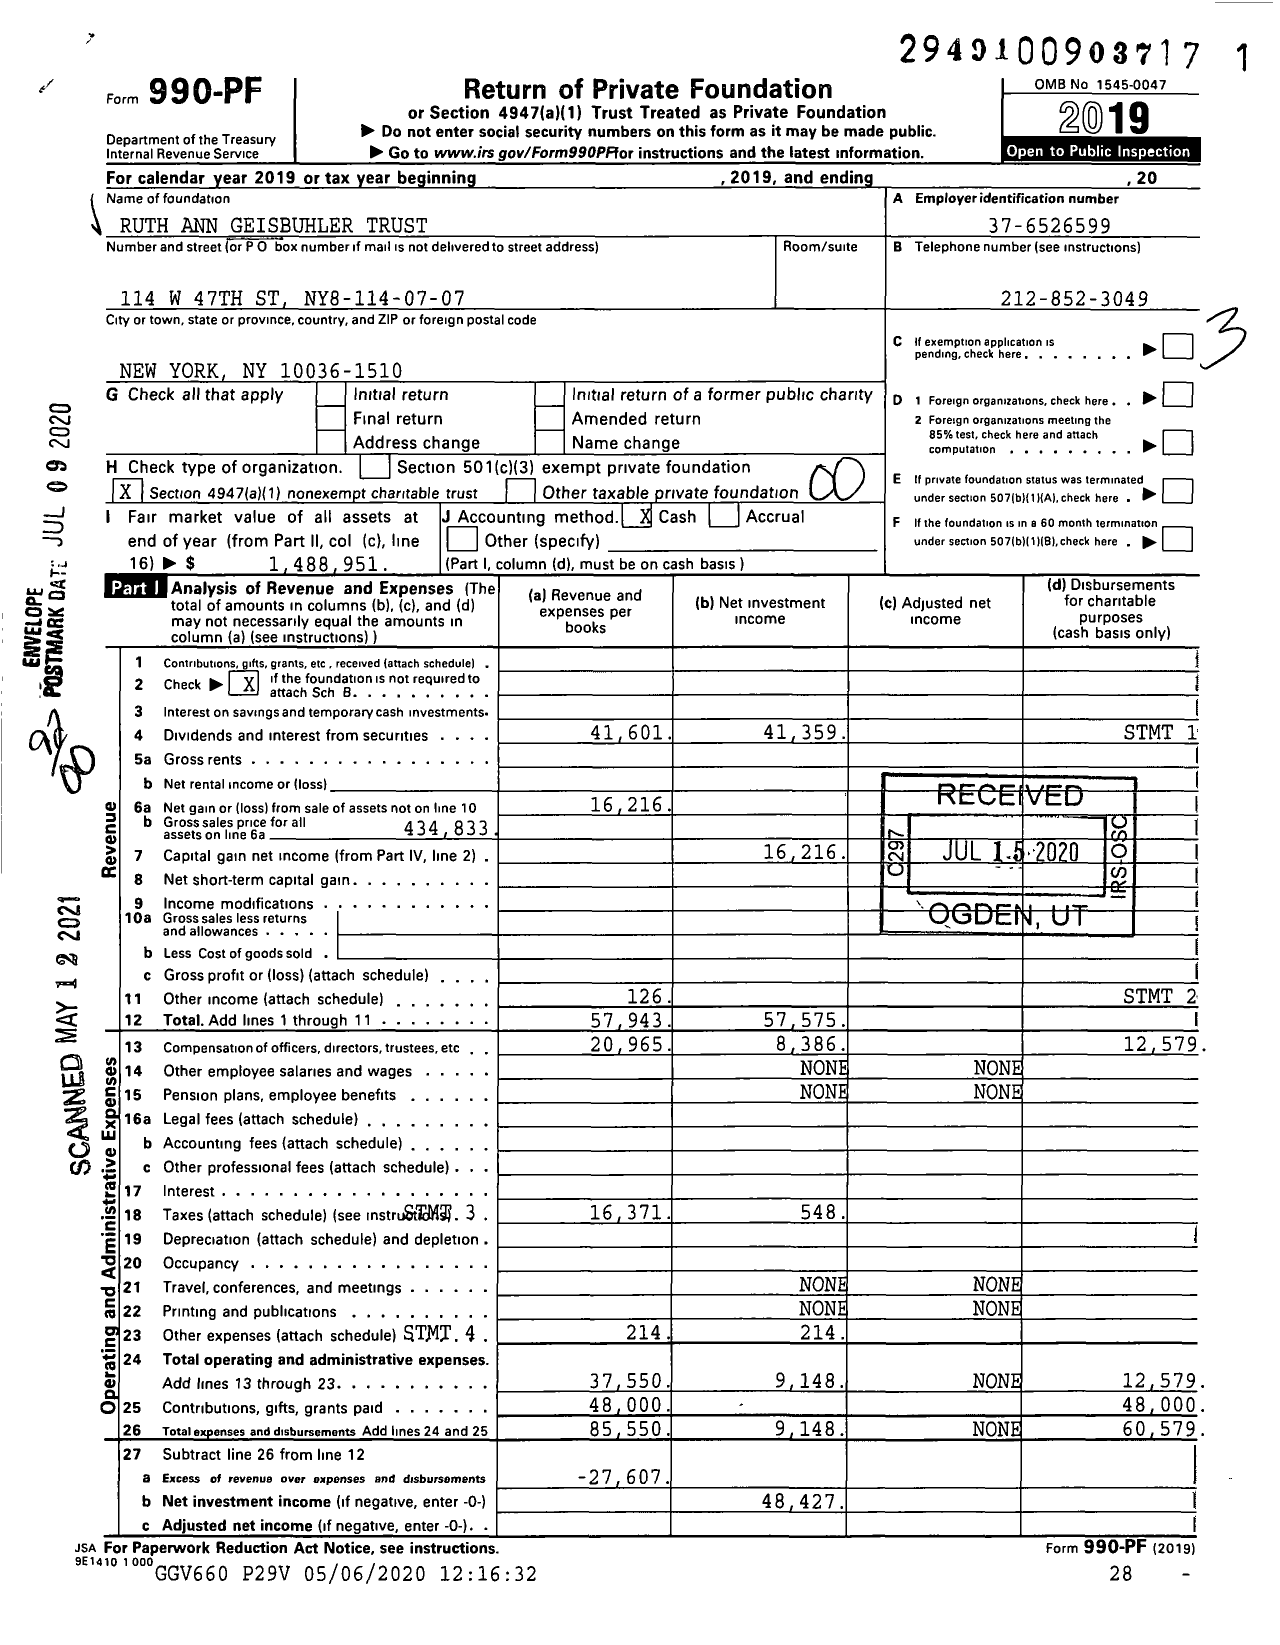 Image of first page of 2019 Form 990PF for Ruth Ann Geisbuhler Trust